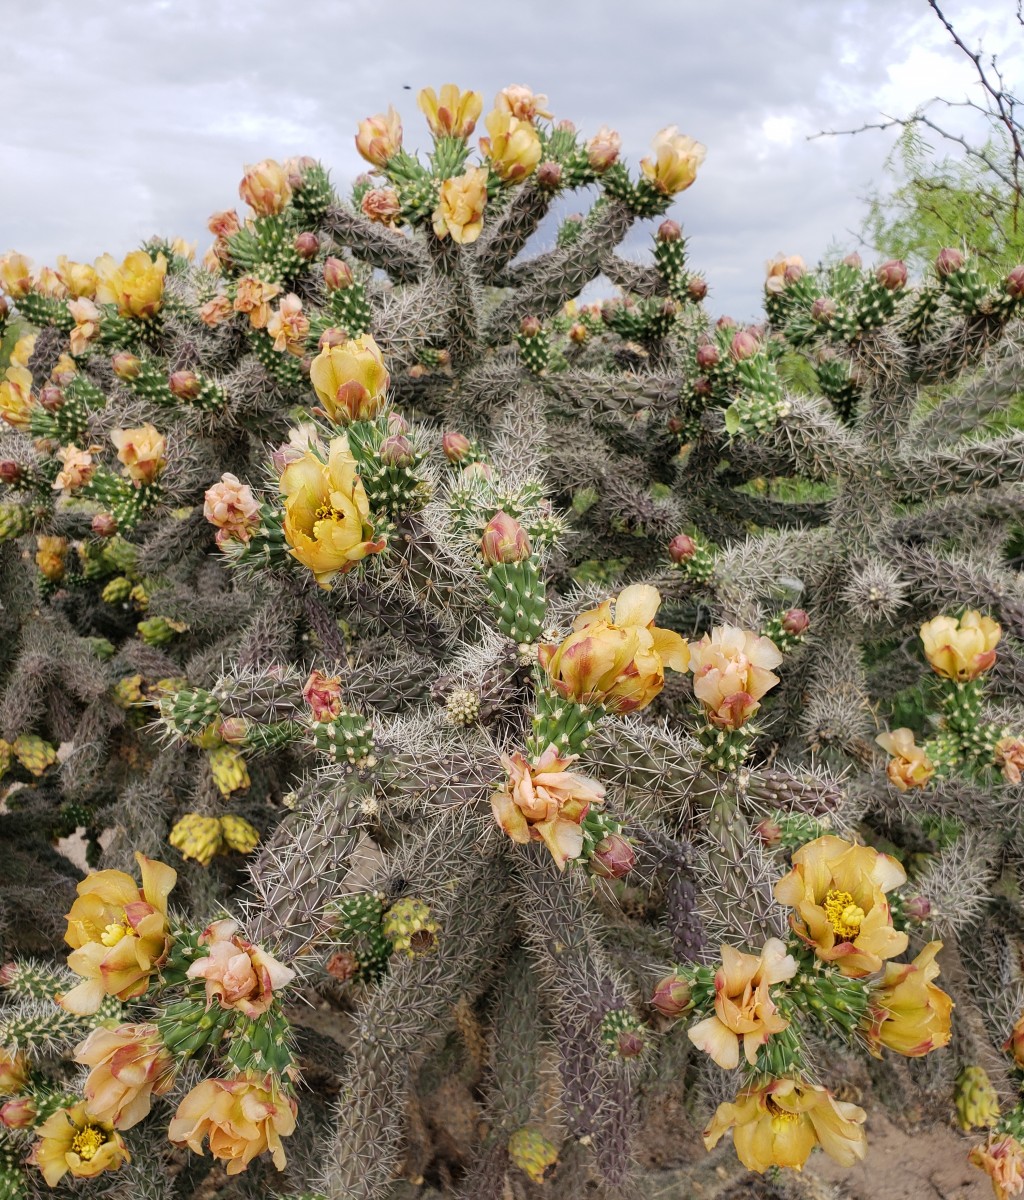 Cane Cholla (cylindropuntia imbricata) is recognizable throughout the southwest United States for its shrubby-shape and silhouette. It is similar in appearance to buckhorn and staghorn chollas. The limbs of the dead plant can be used to make walking sticks and other items.